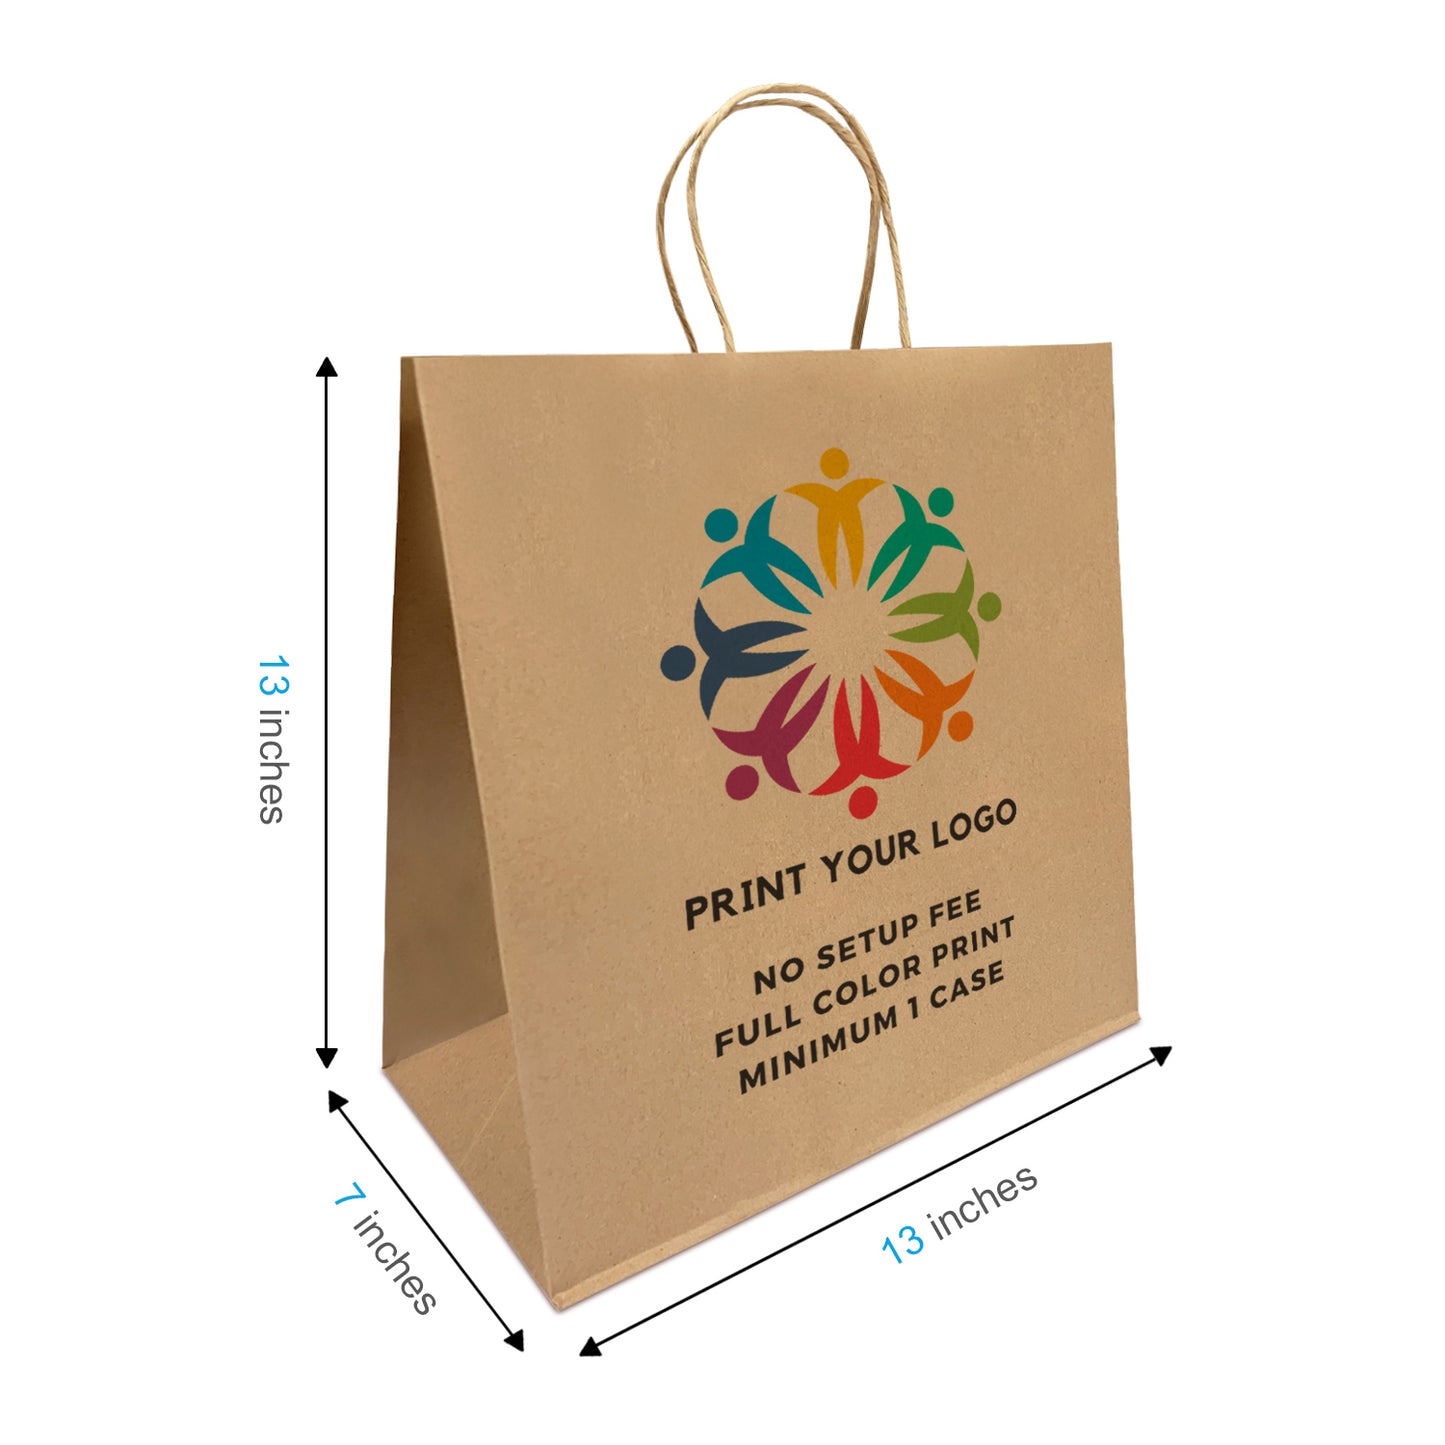 250pcs Star 13x7x13 inches Kraft Paper Bags Twisted Handles, Full Color Print, Printed in North America